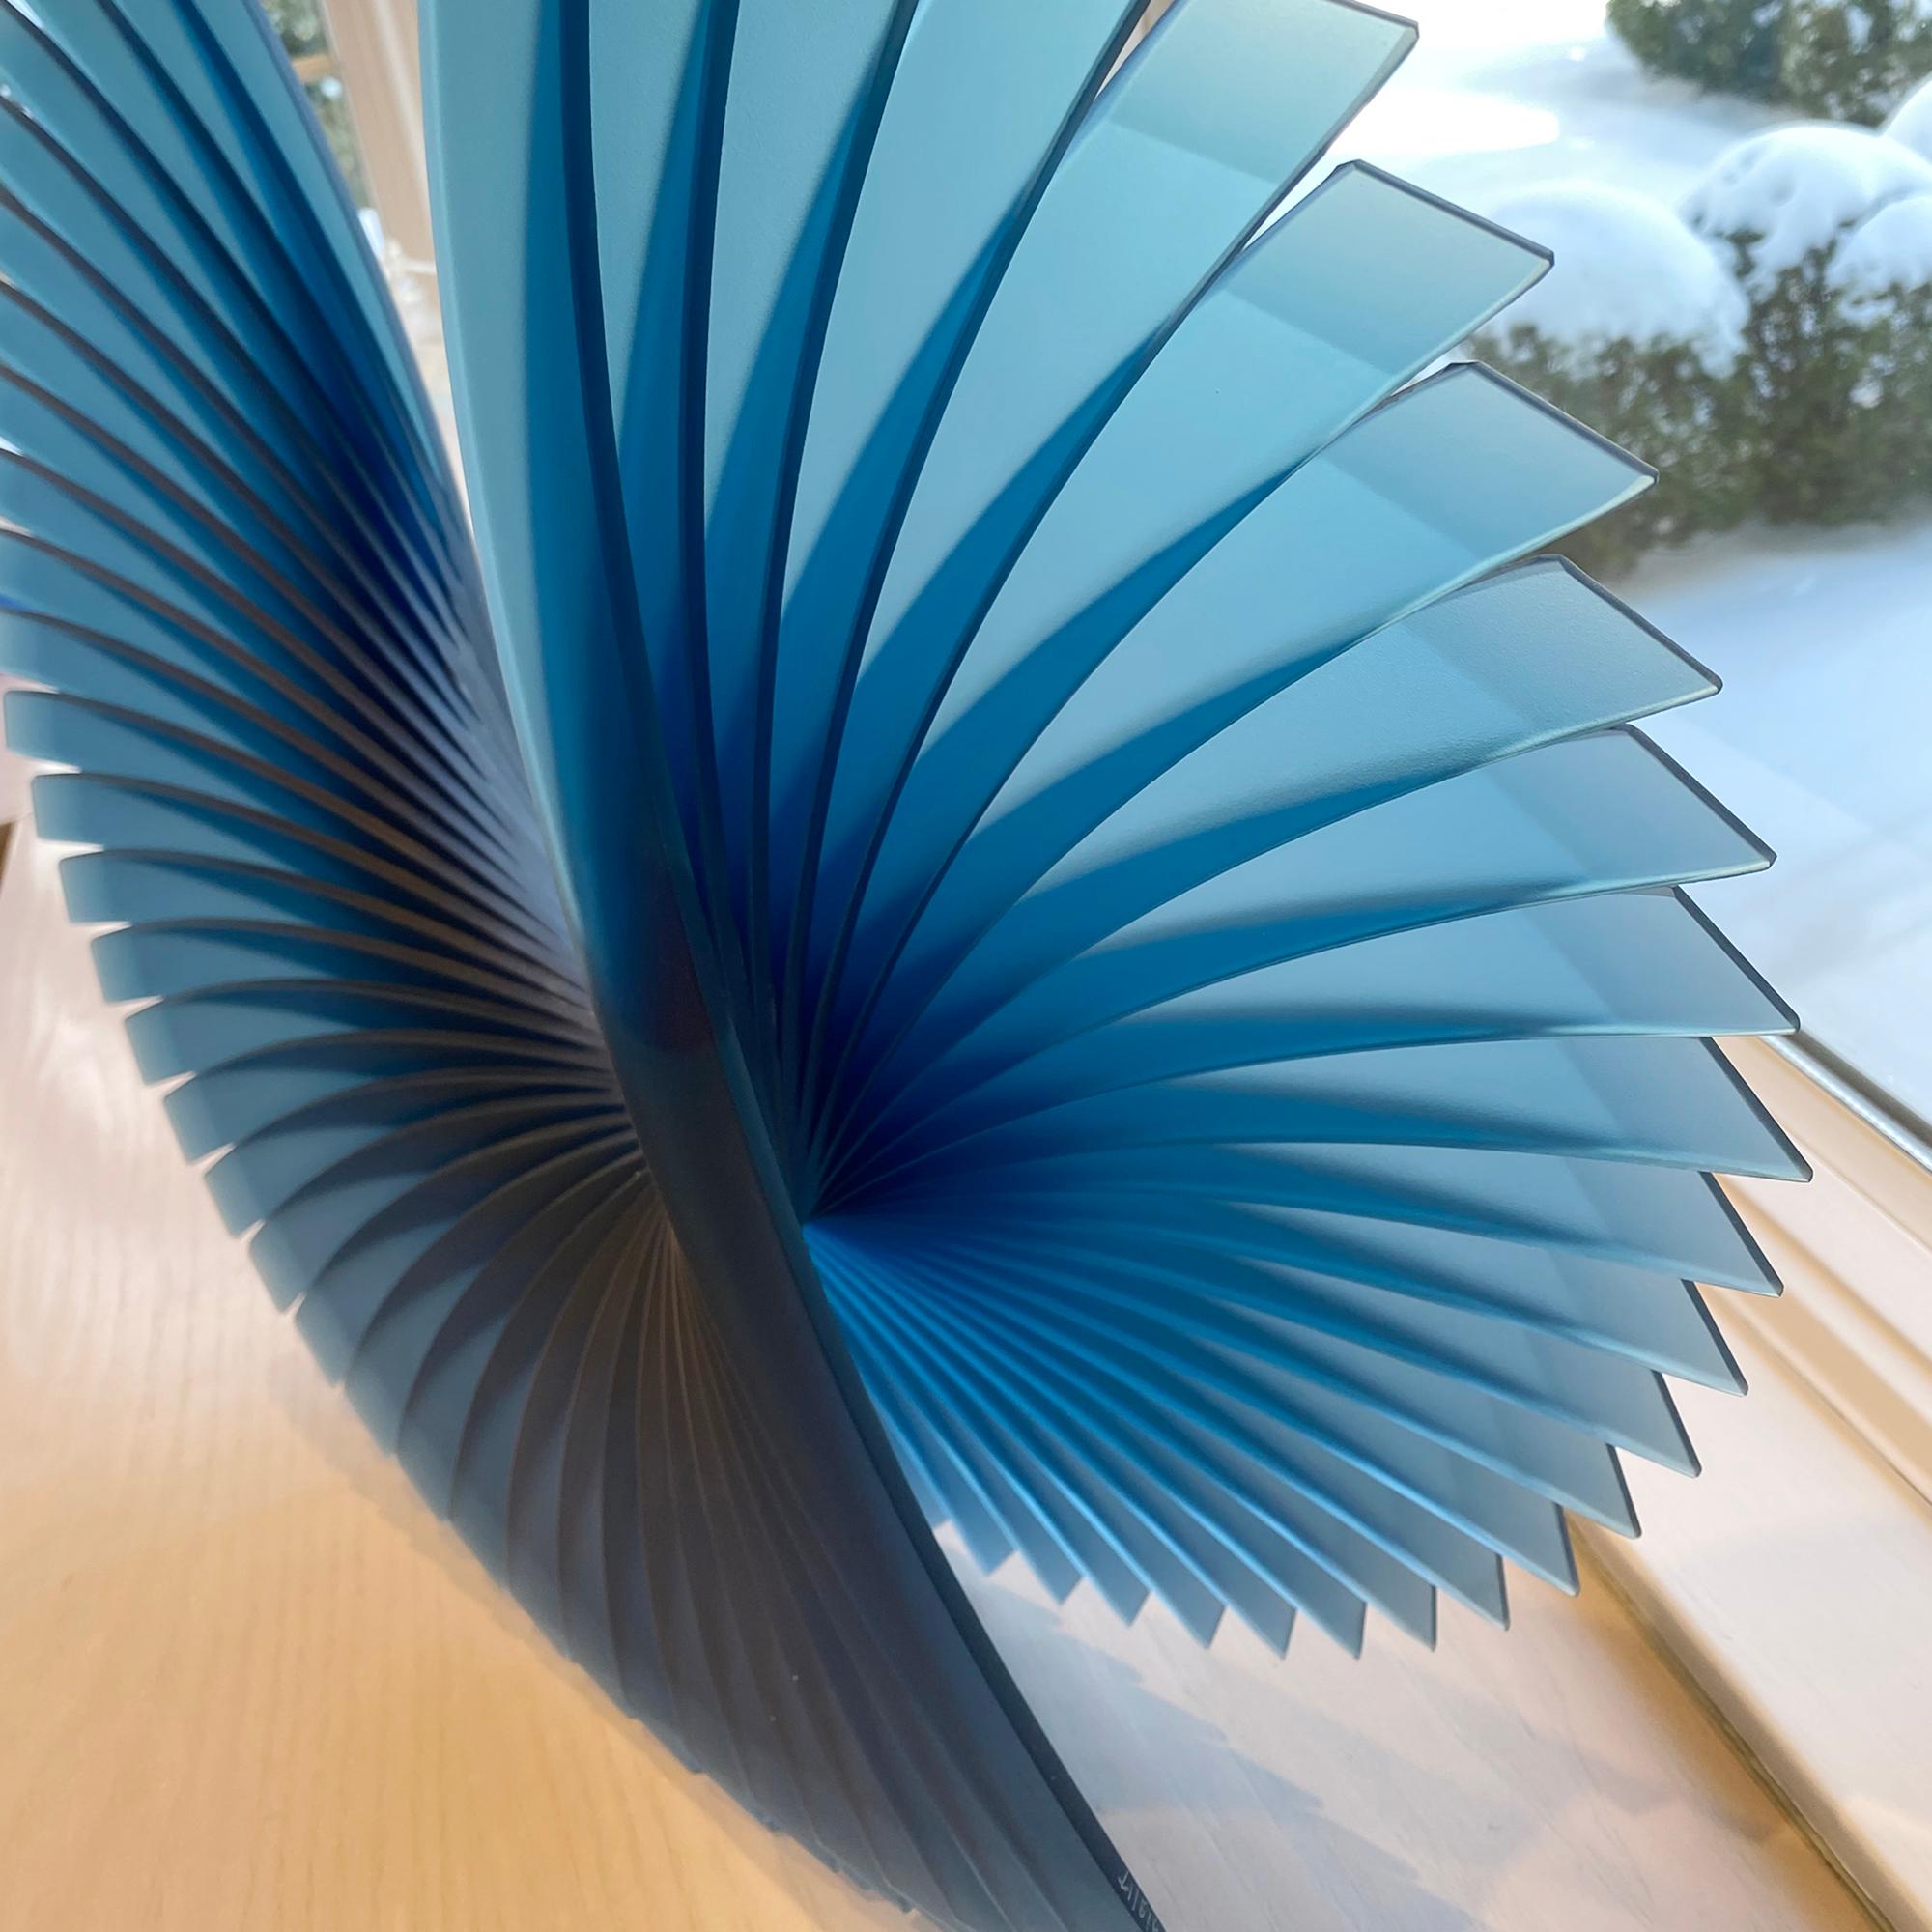 'Phoenix in Pacifica', Cut, Ground, Sand Blasted, Float, Glass Sculpture - Blue Abstract Sculpture by Tom Marosz